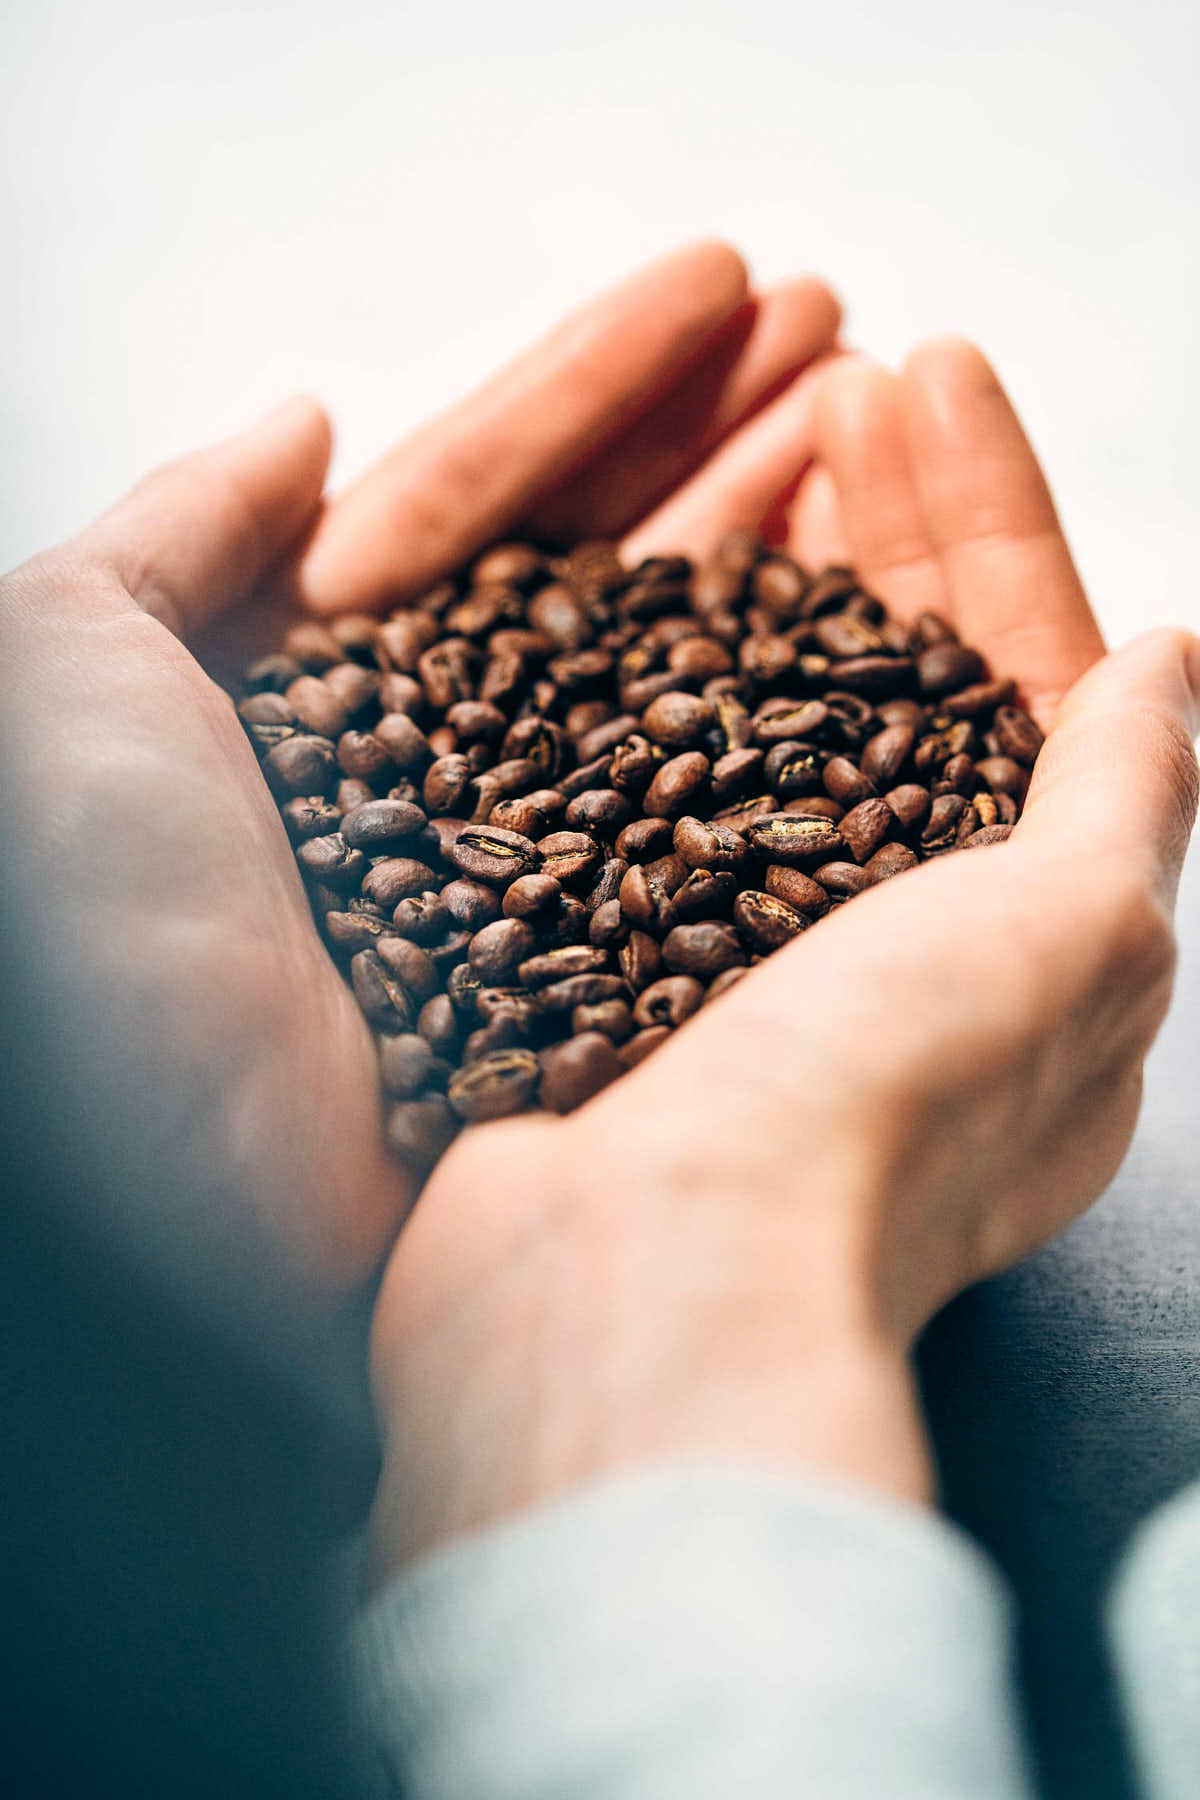 Coffe beans being held in palms